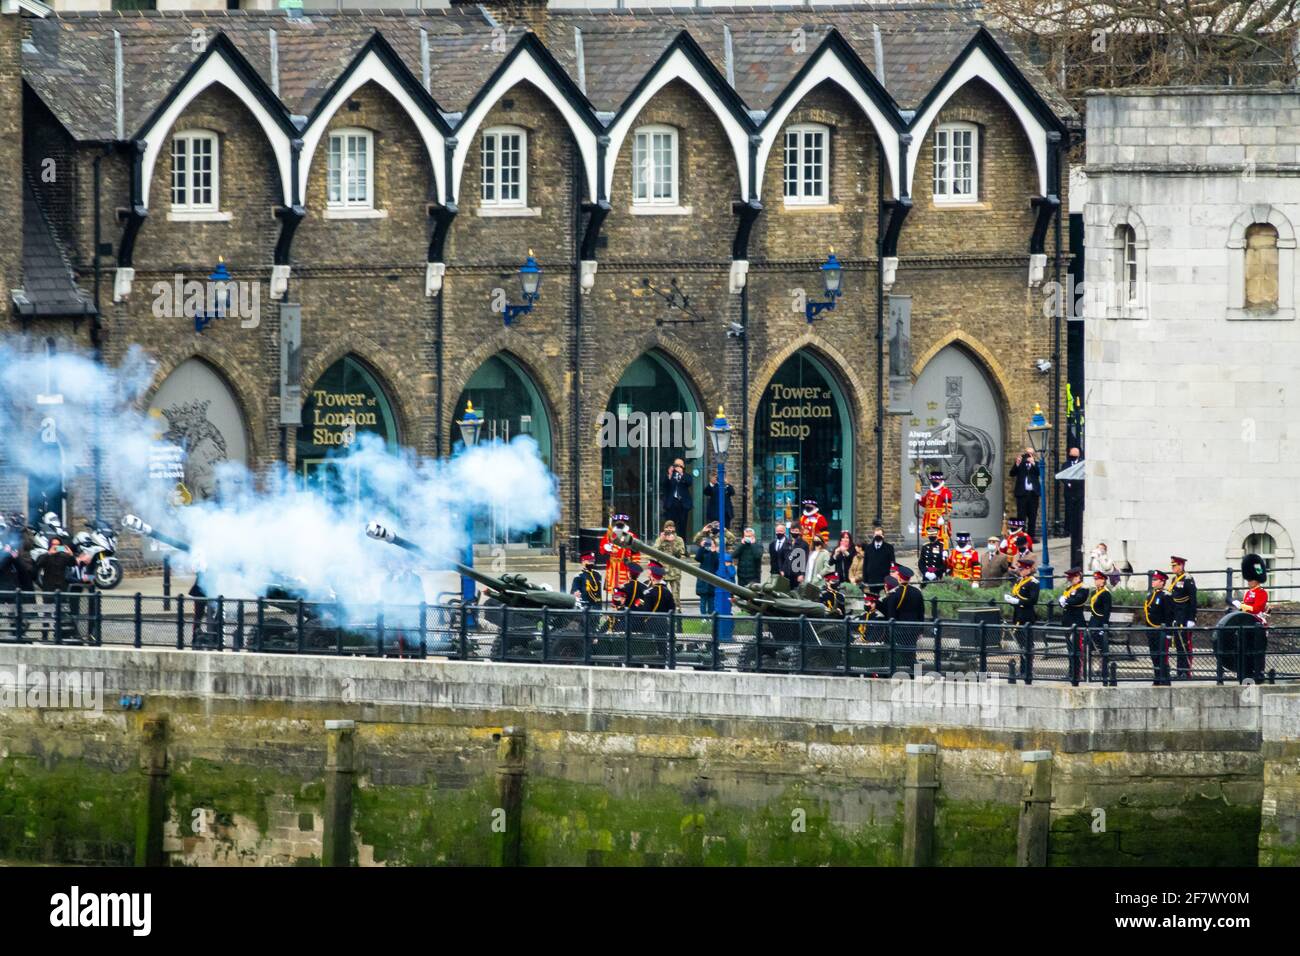 London, 10th April, 2021. 41 Gun salute by the Honourable Artillery Company at the Tower of London to mark death of HRH Prince Philip, Duke of Edinburgh. Stock Photo